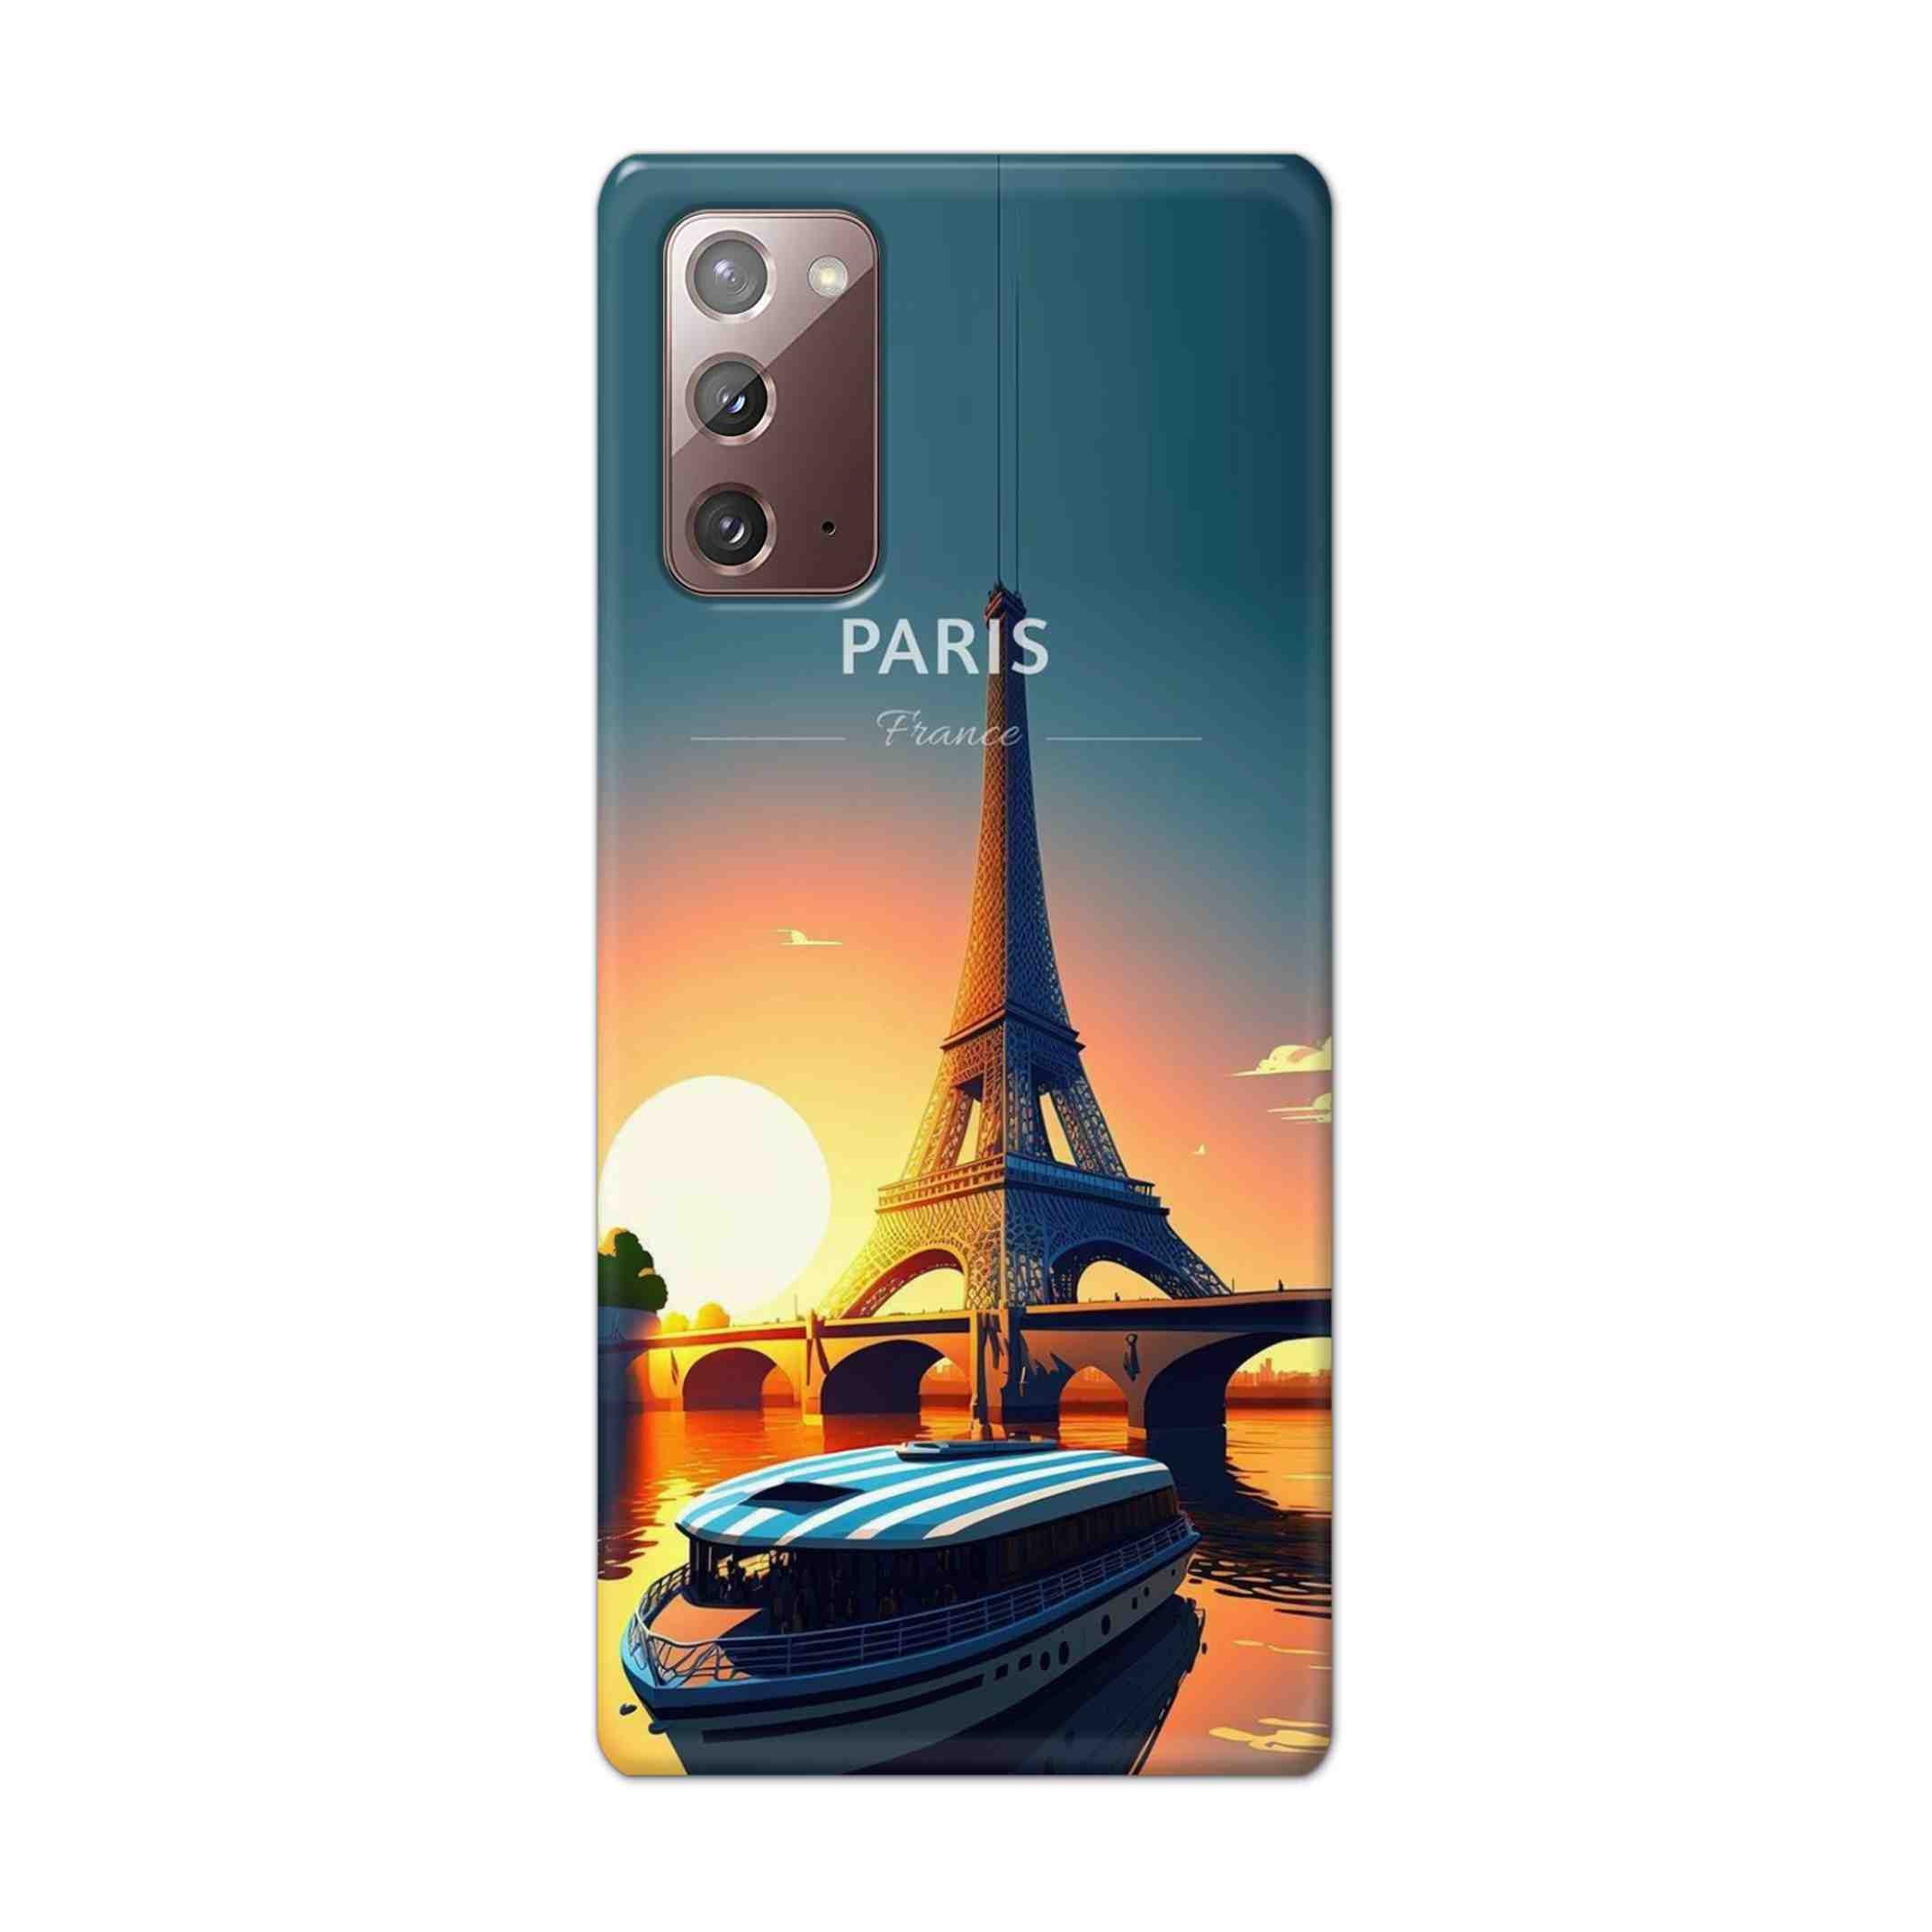 Buy France Hard Back Mobile Phone Case Cover For Samsung Galaxy Note 20 Online